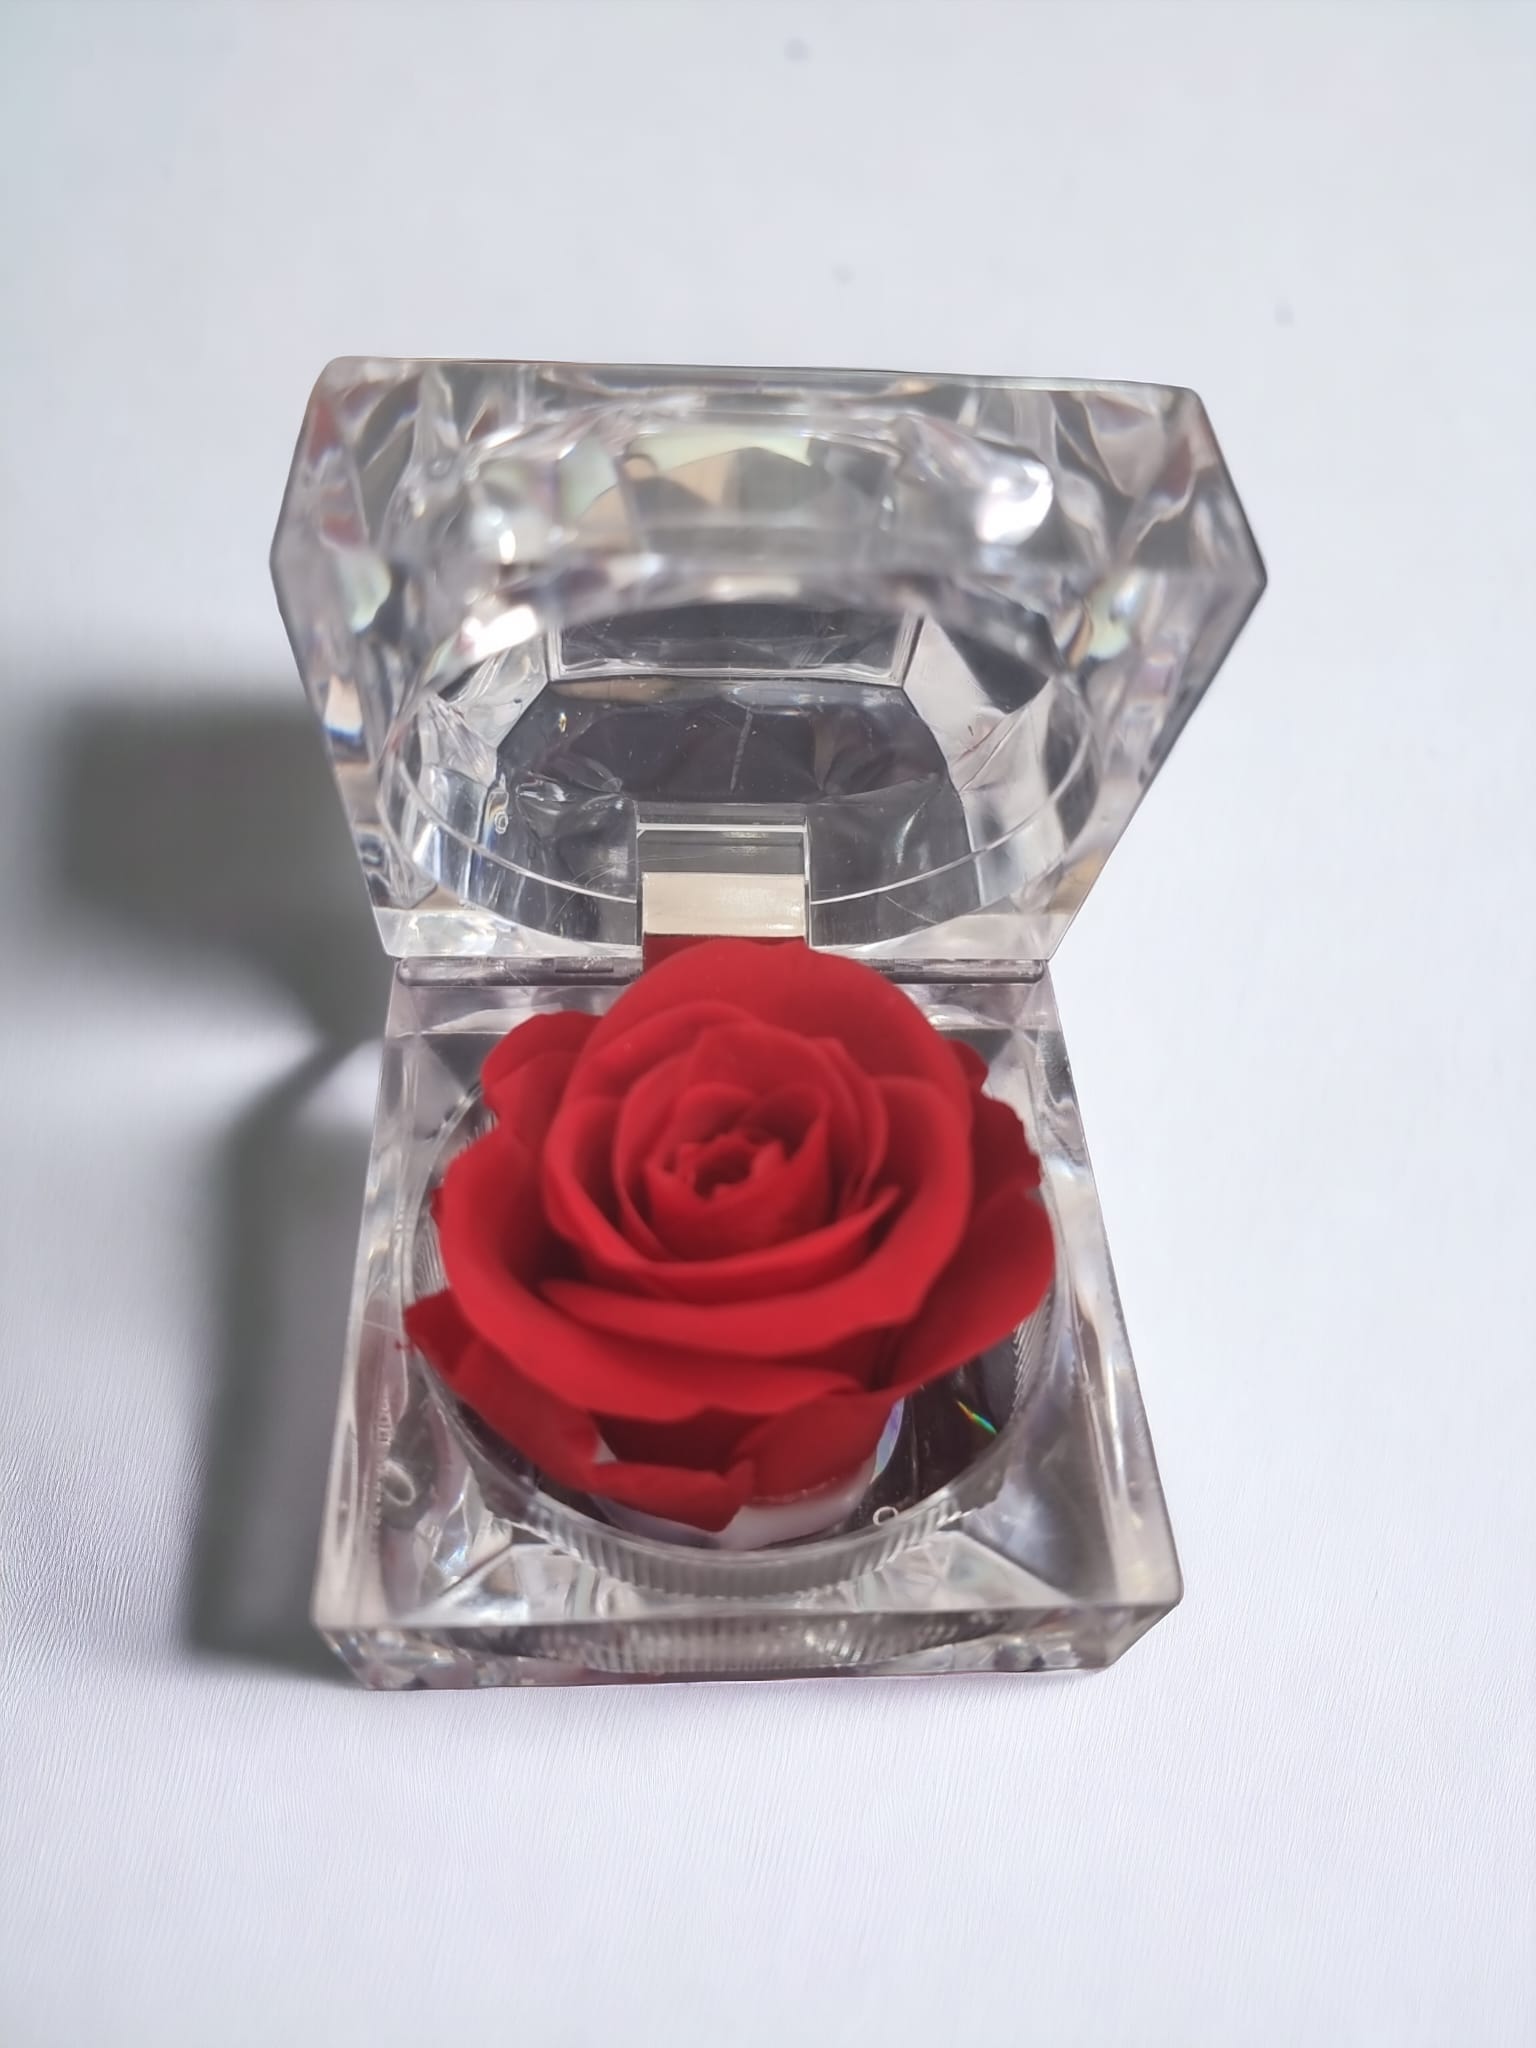 Preserved Red Rose in Glass Acrylic Box - A Perfect Valentine's Day Gift - Auras Workshop  -   -   - Cyprus & Greece - Wholesale - Retail #